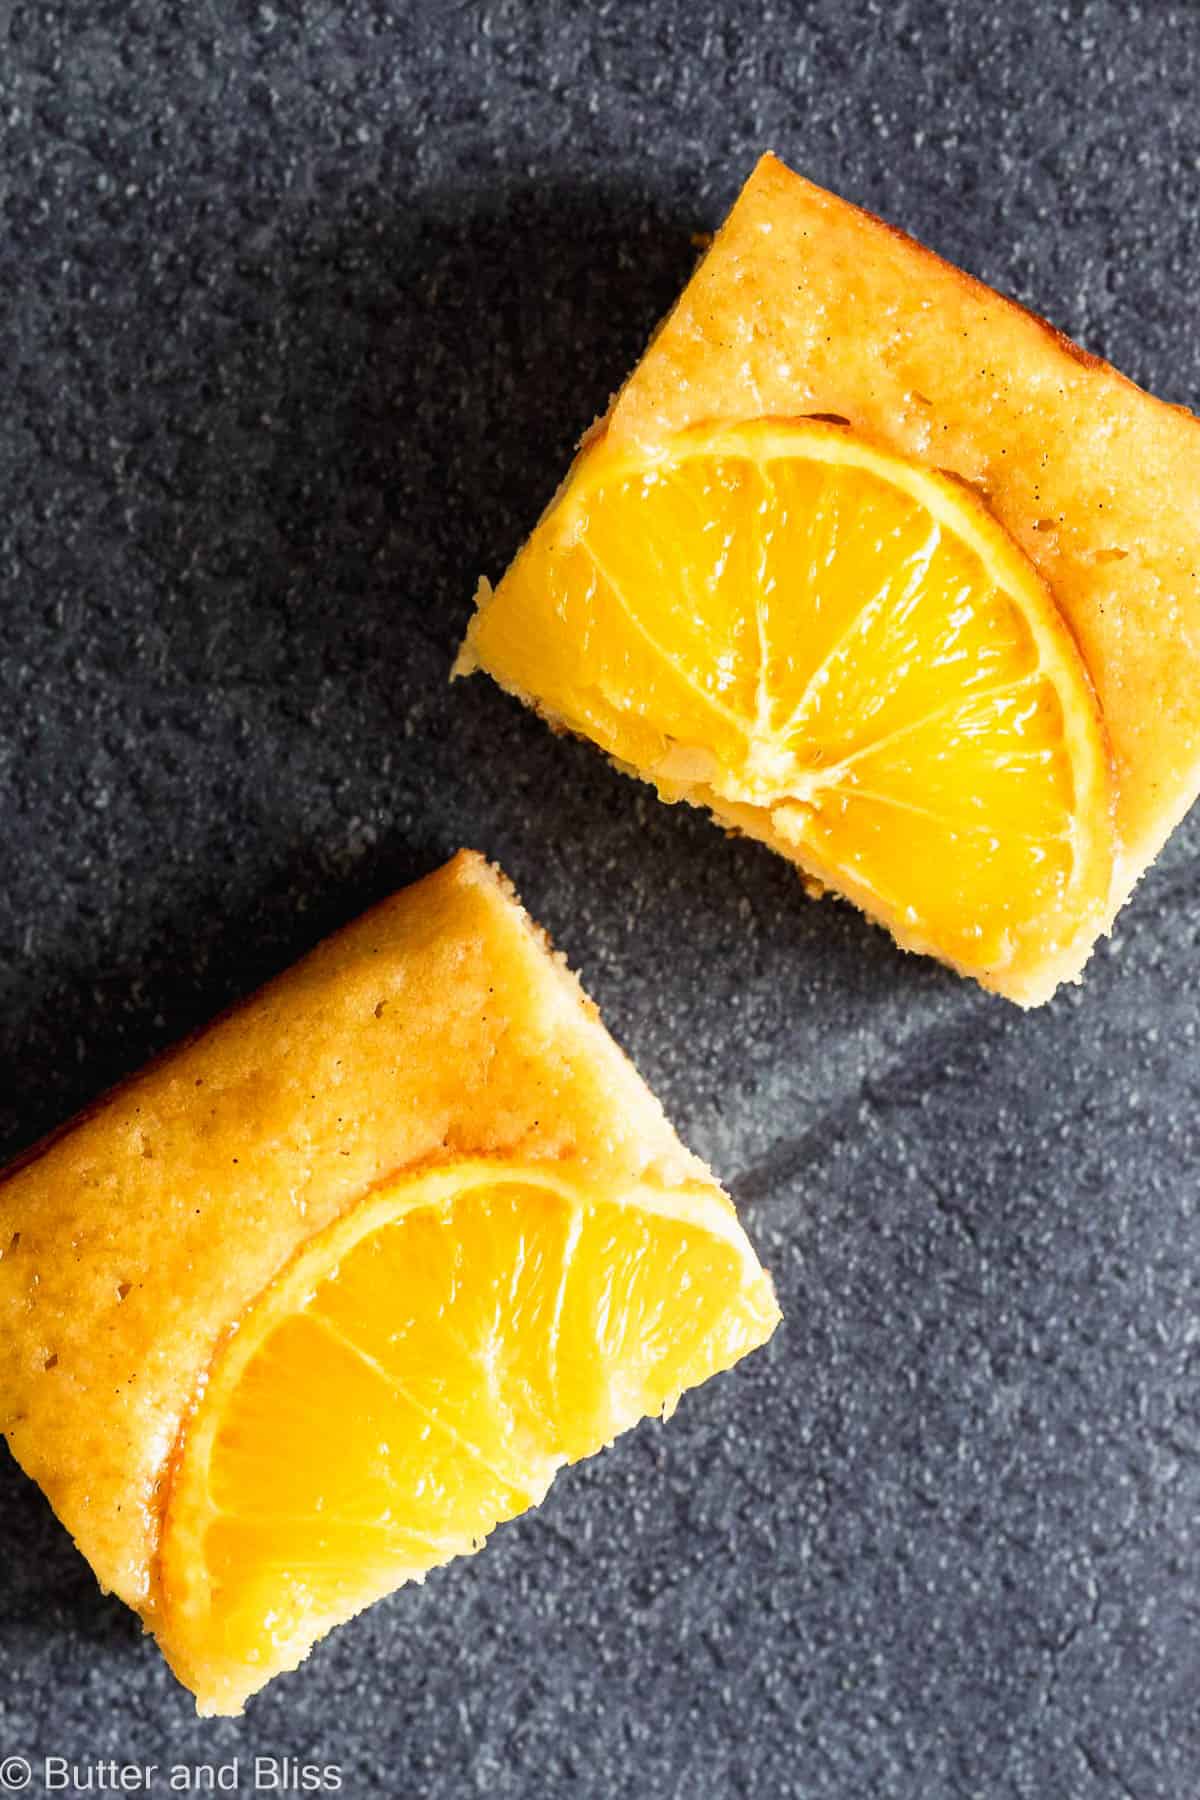 Two pretty slices of orange snack cake with orange slices on a table.